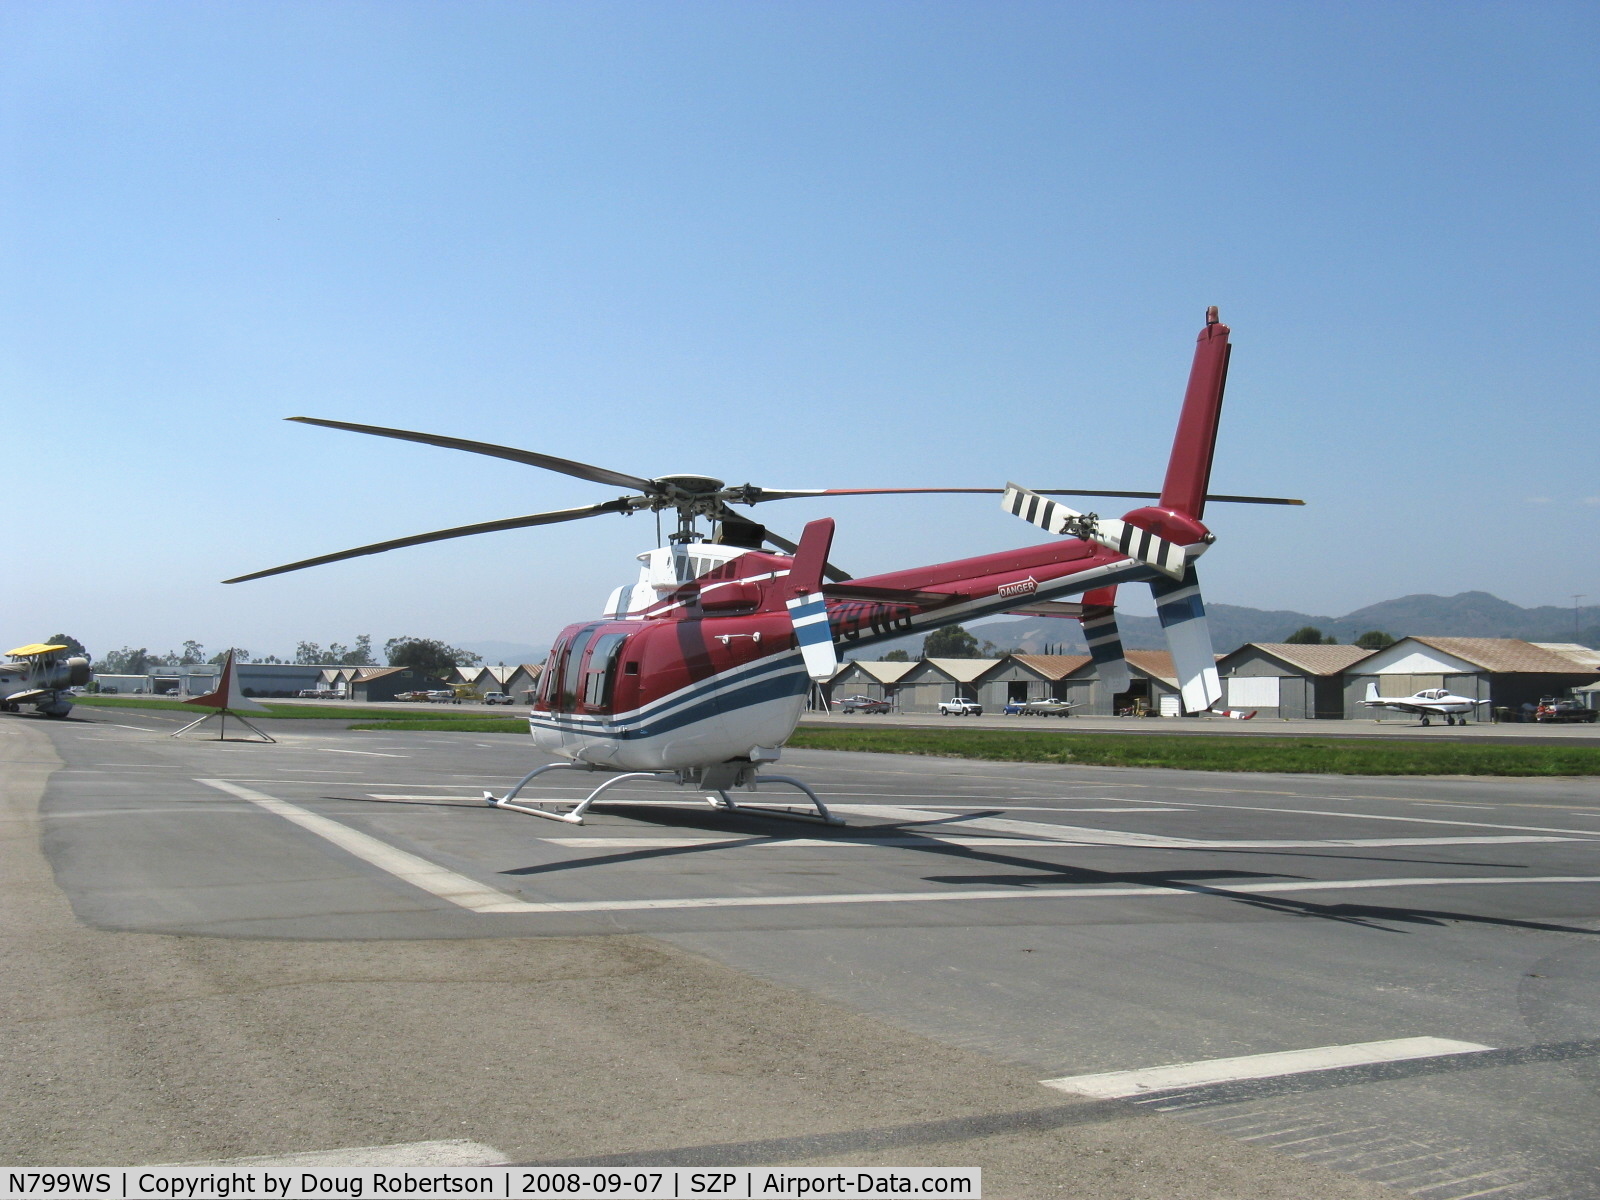 N799WS, 2002 Bell 407 C/N 53538, 2002 Bell 407, one Rolls Royce 250-C47B turboshaft rated at 813 shp for takeoff, 701 shp continuous